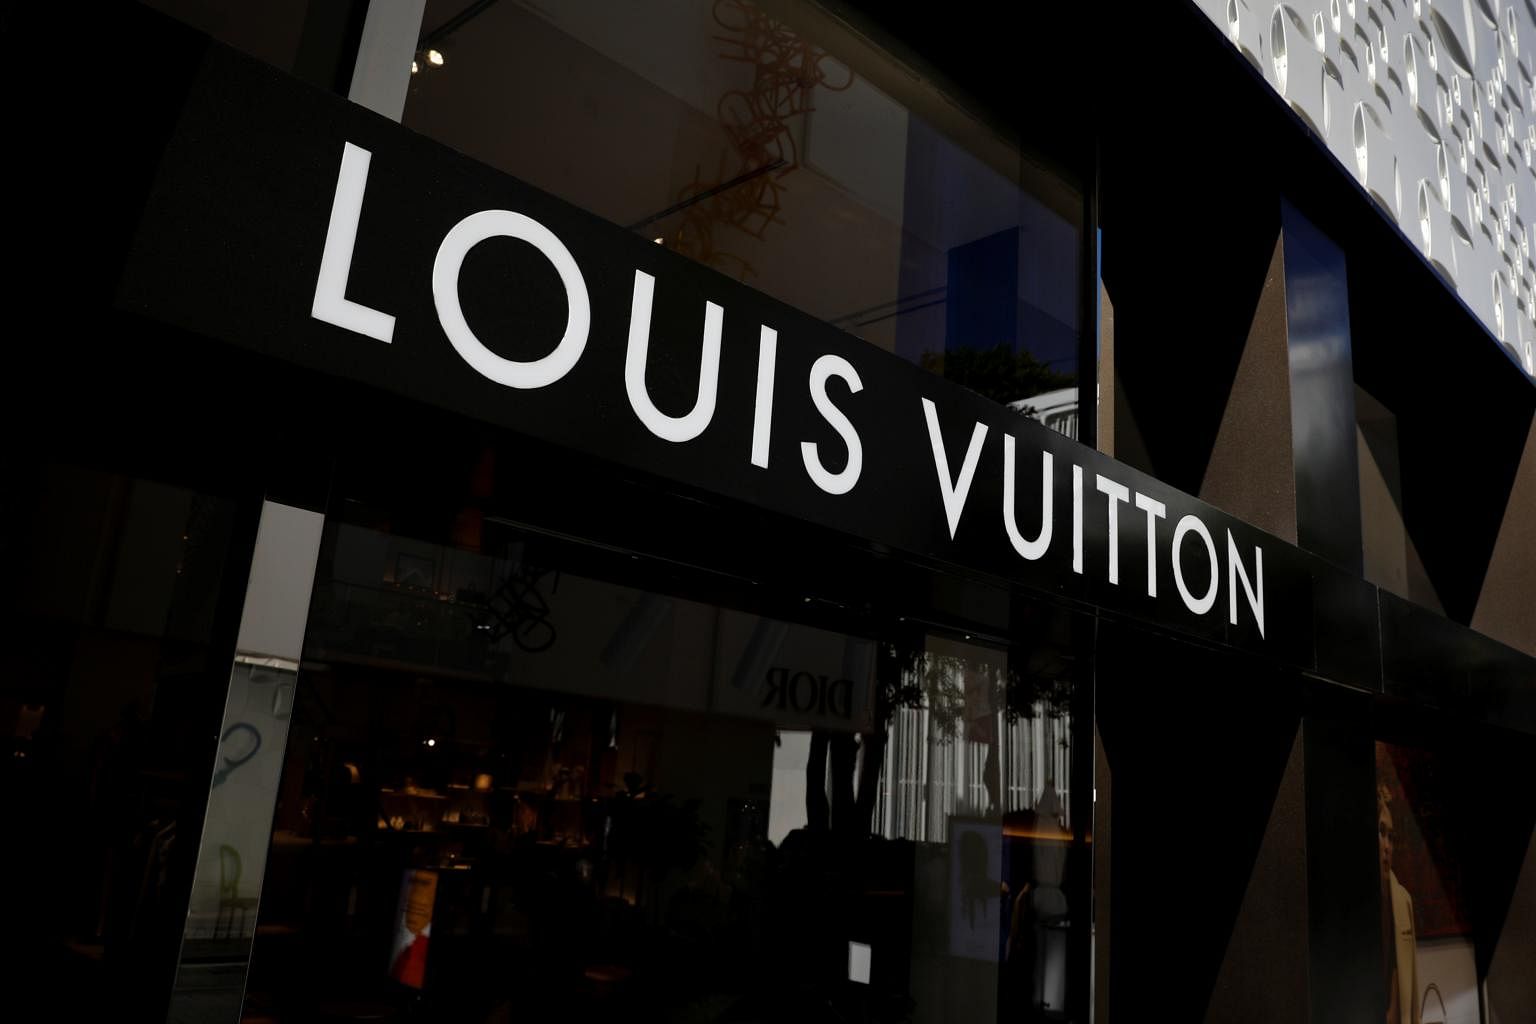 Meta, Instagram become hot spots for fake Louis Vuitton, Gucci and Chanel